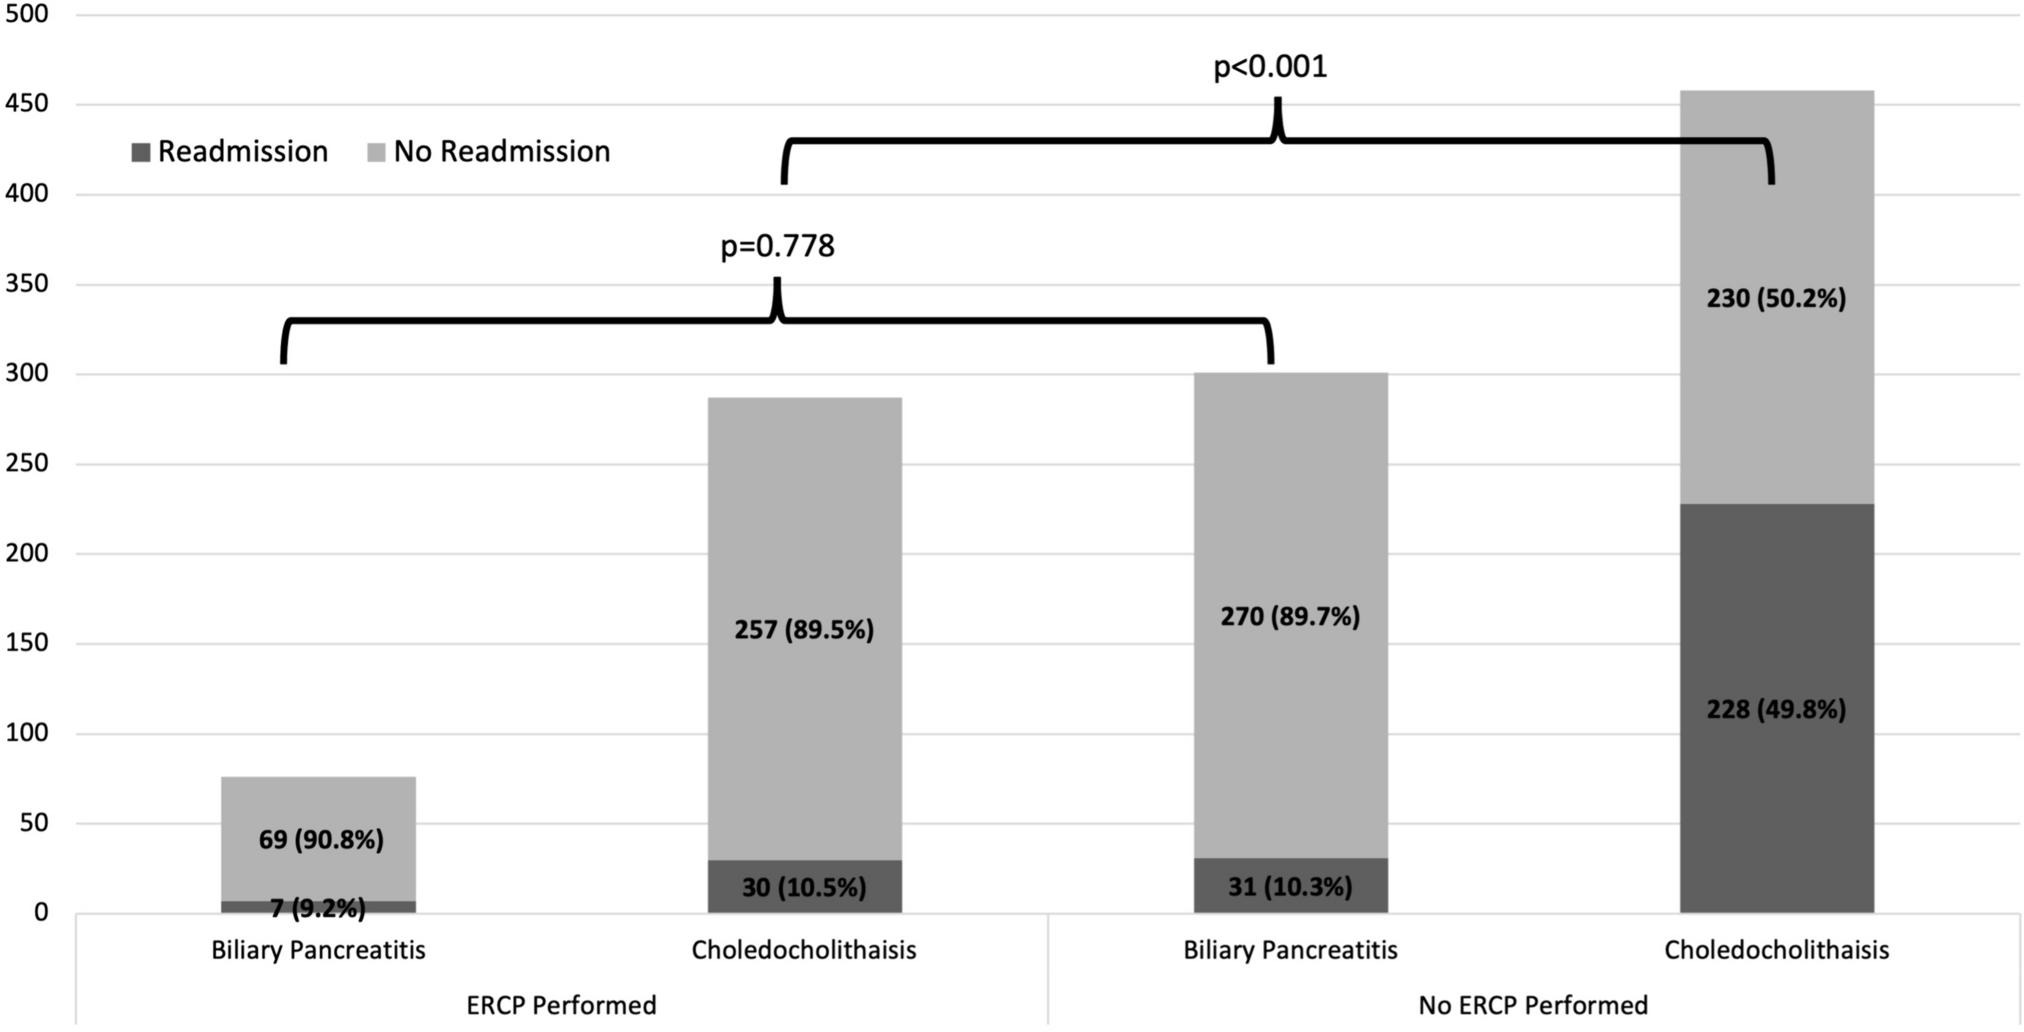 Index admission cholecystectomy for biliary acute pancreatitis or choledocholithiasis reduces 30-day readmission rates in children